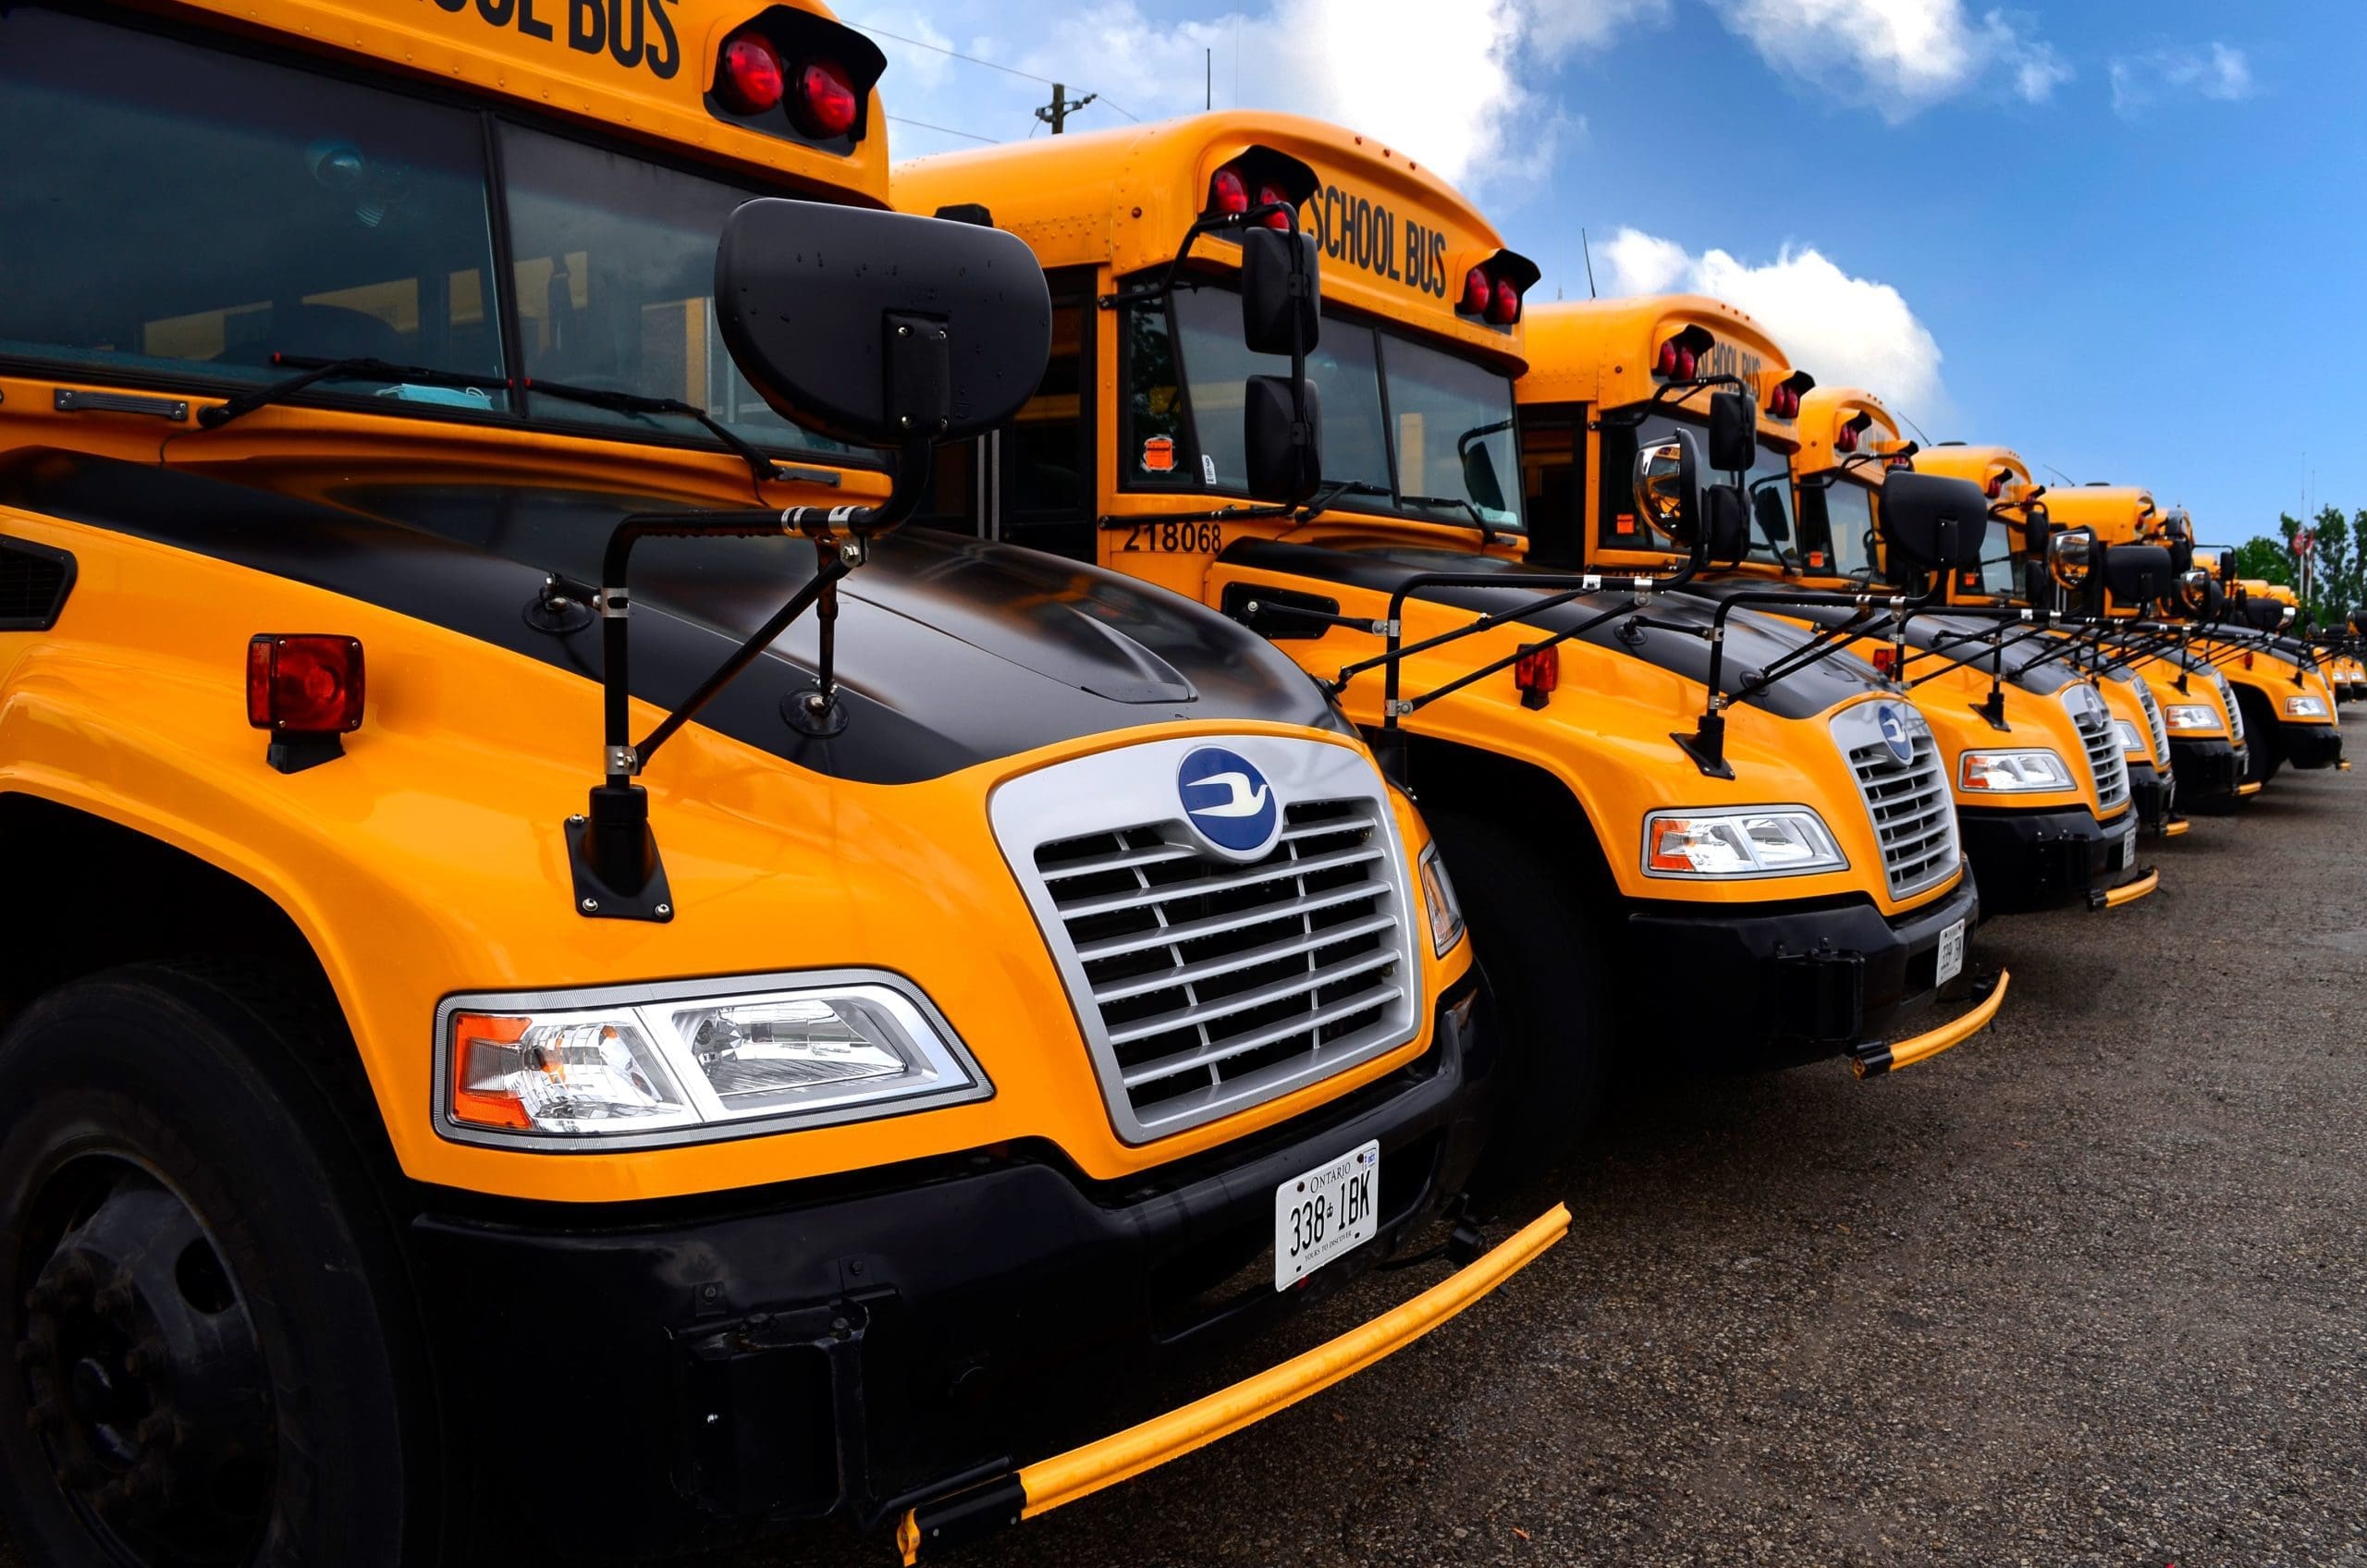 Featured image for “Appo votes to buy 25 buses for fall use”